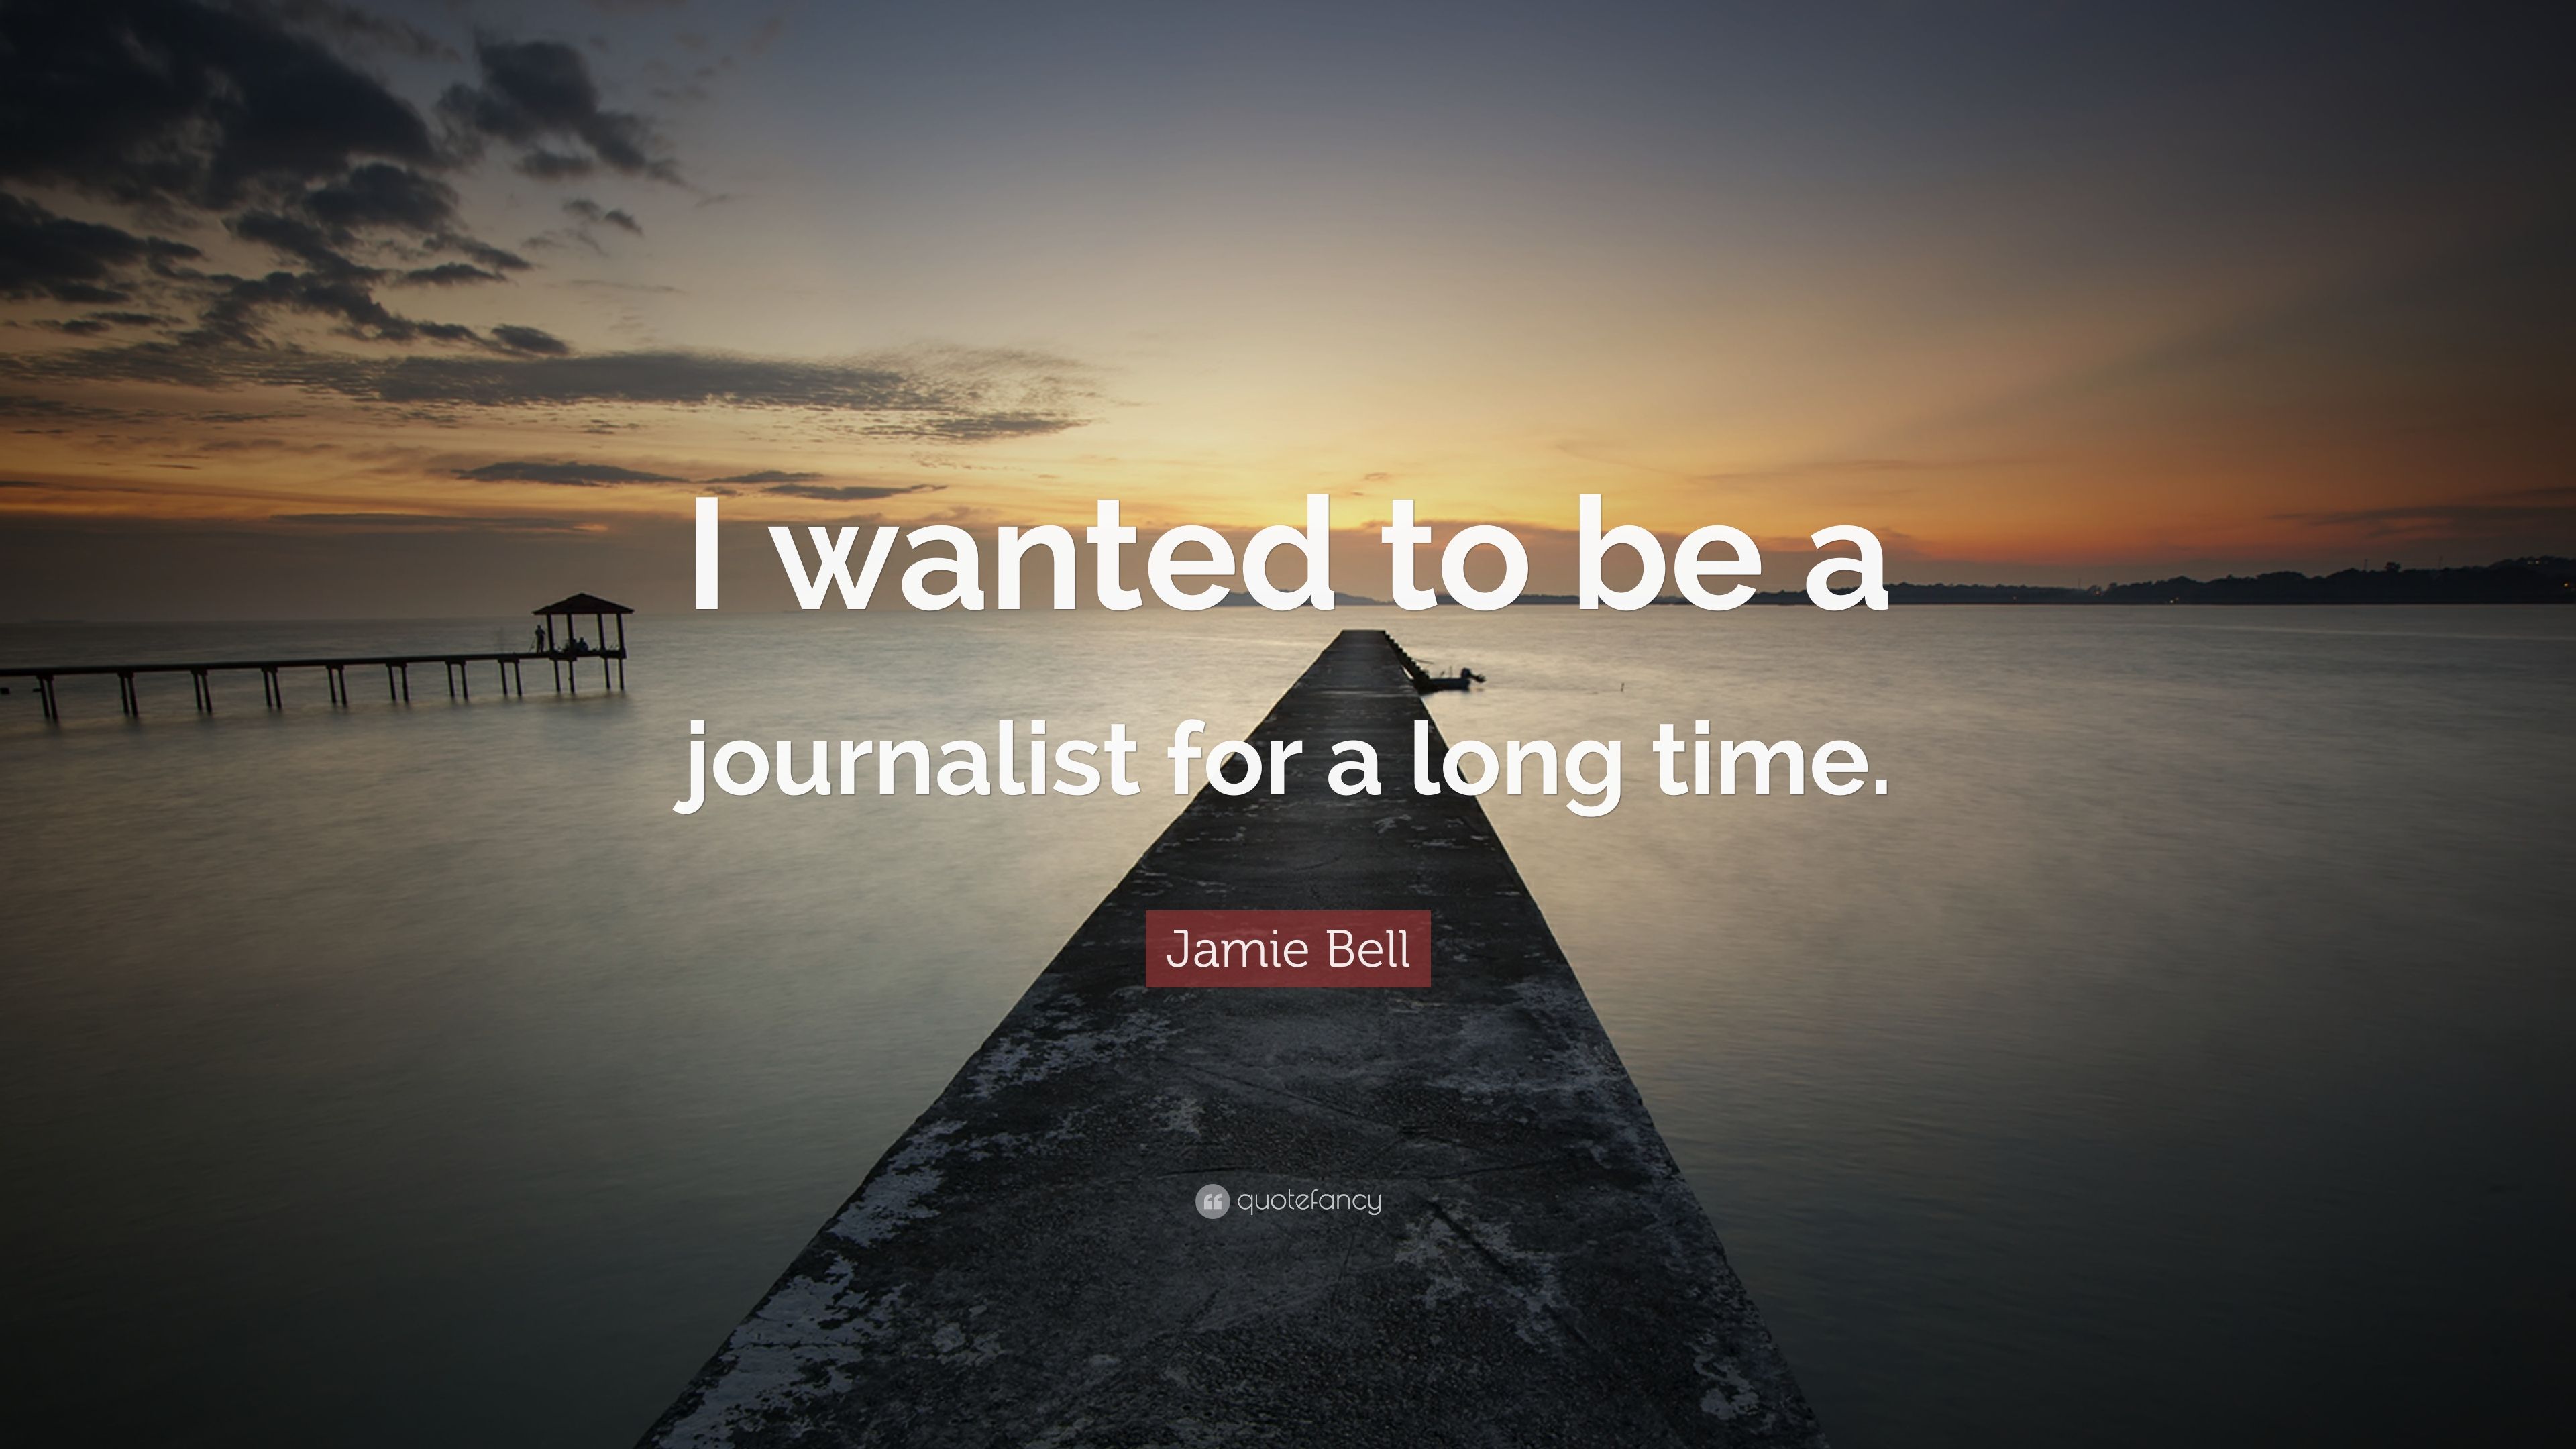 Jamie Bell Quote: “I wanted to be a journalist for a long time